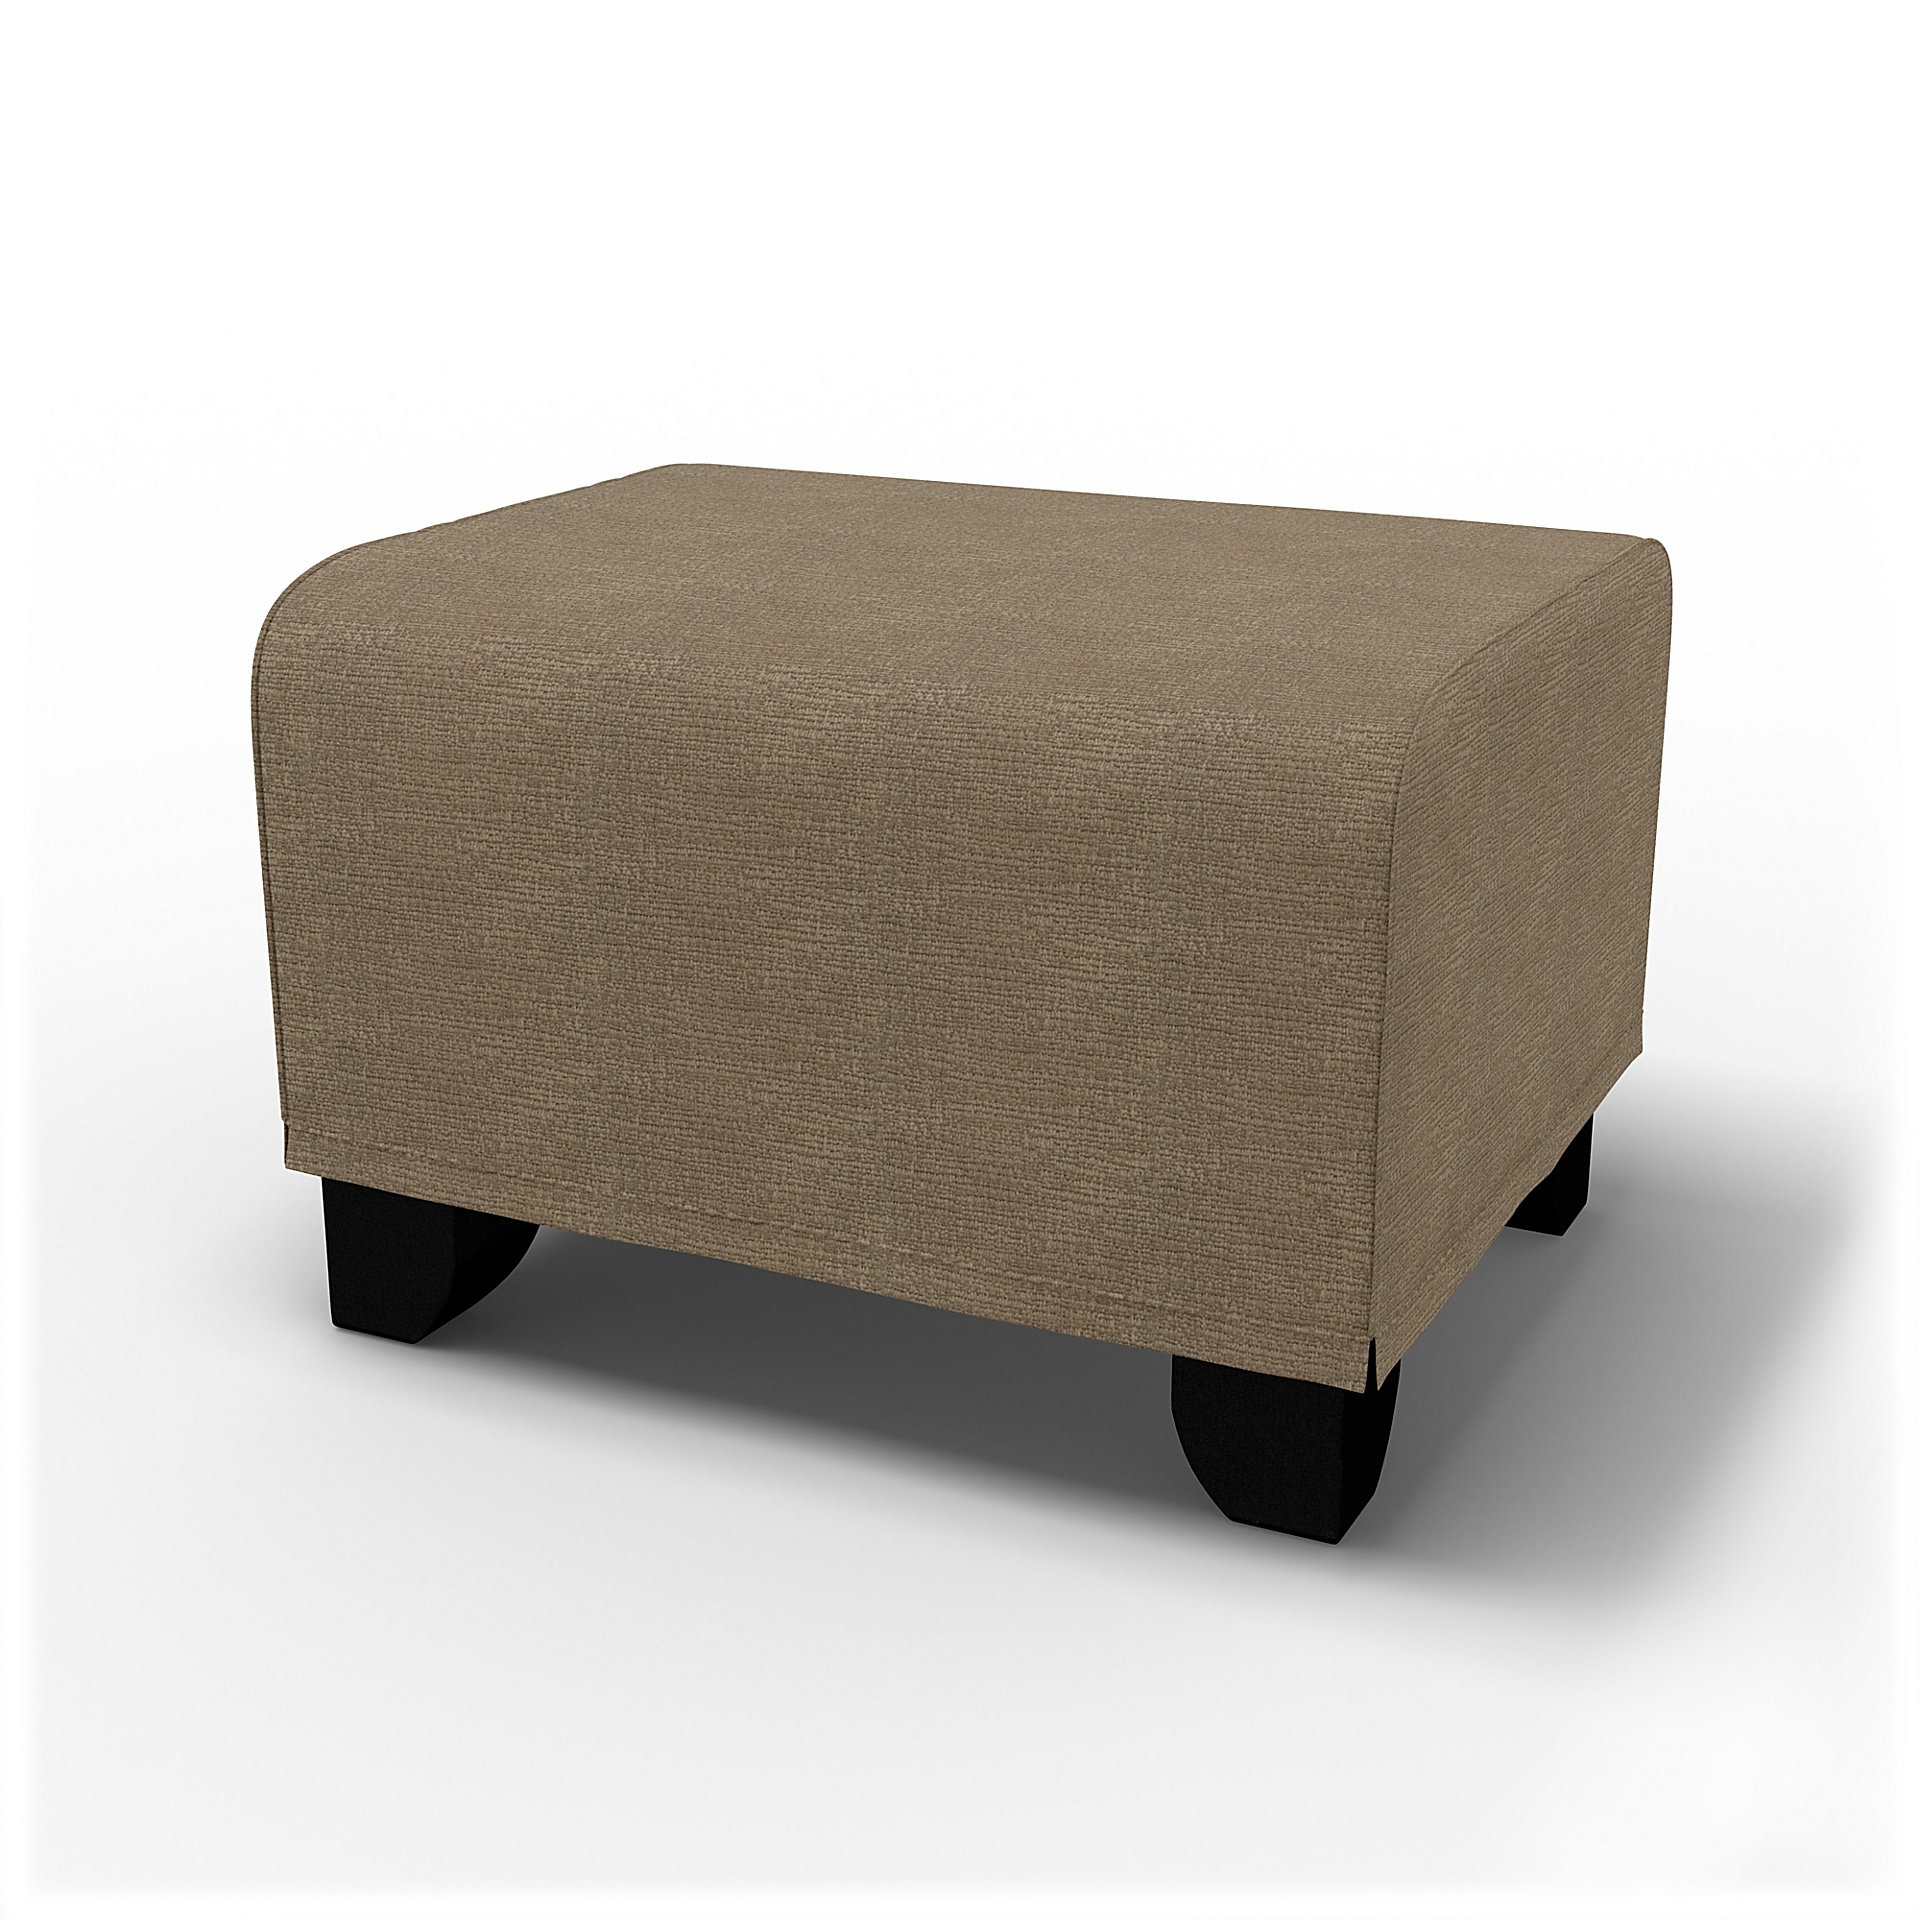 IKEA - Gronlid Footstool Cover, Camel, Boucle & Texture - Bemz